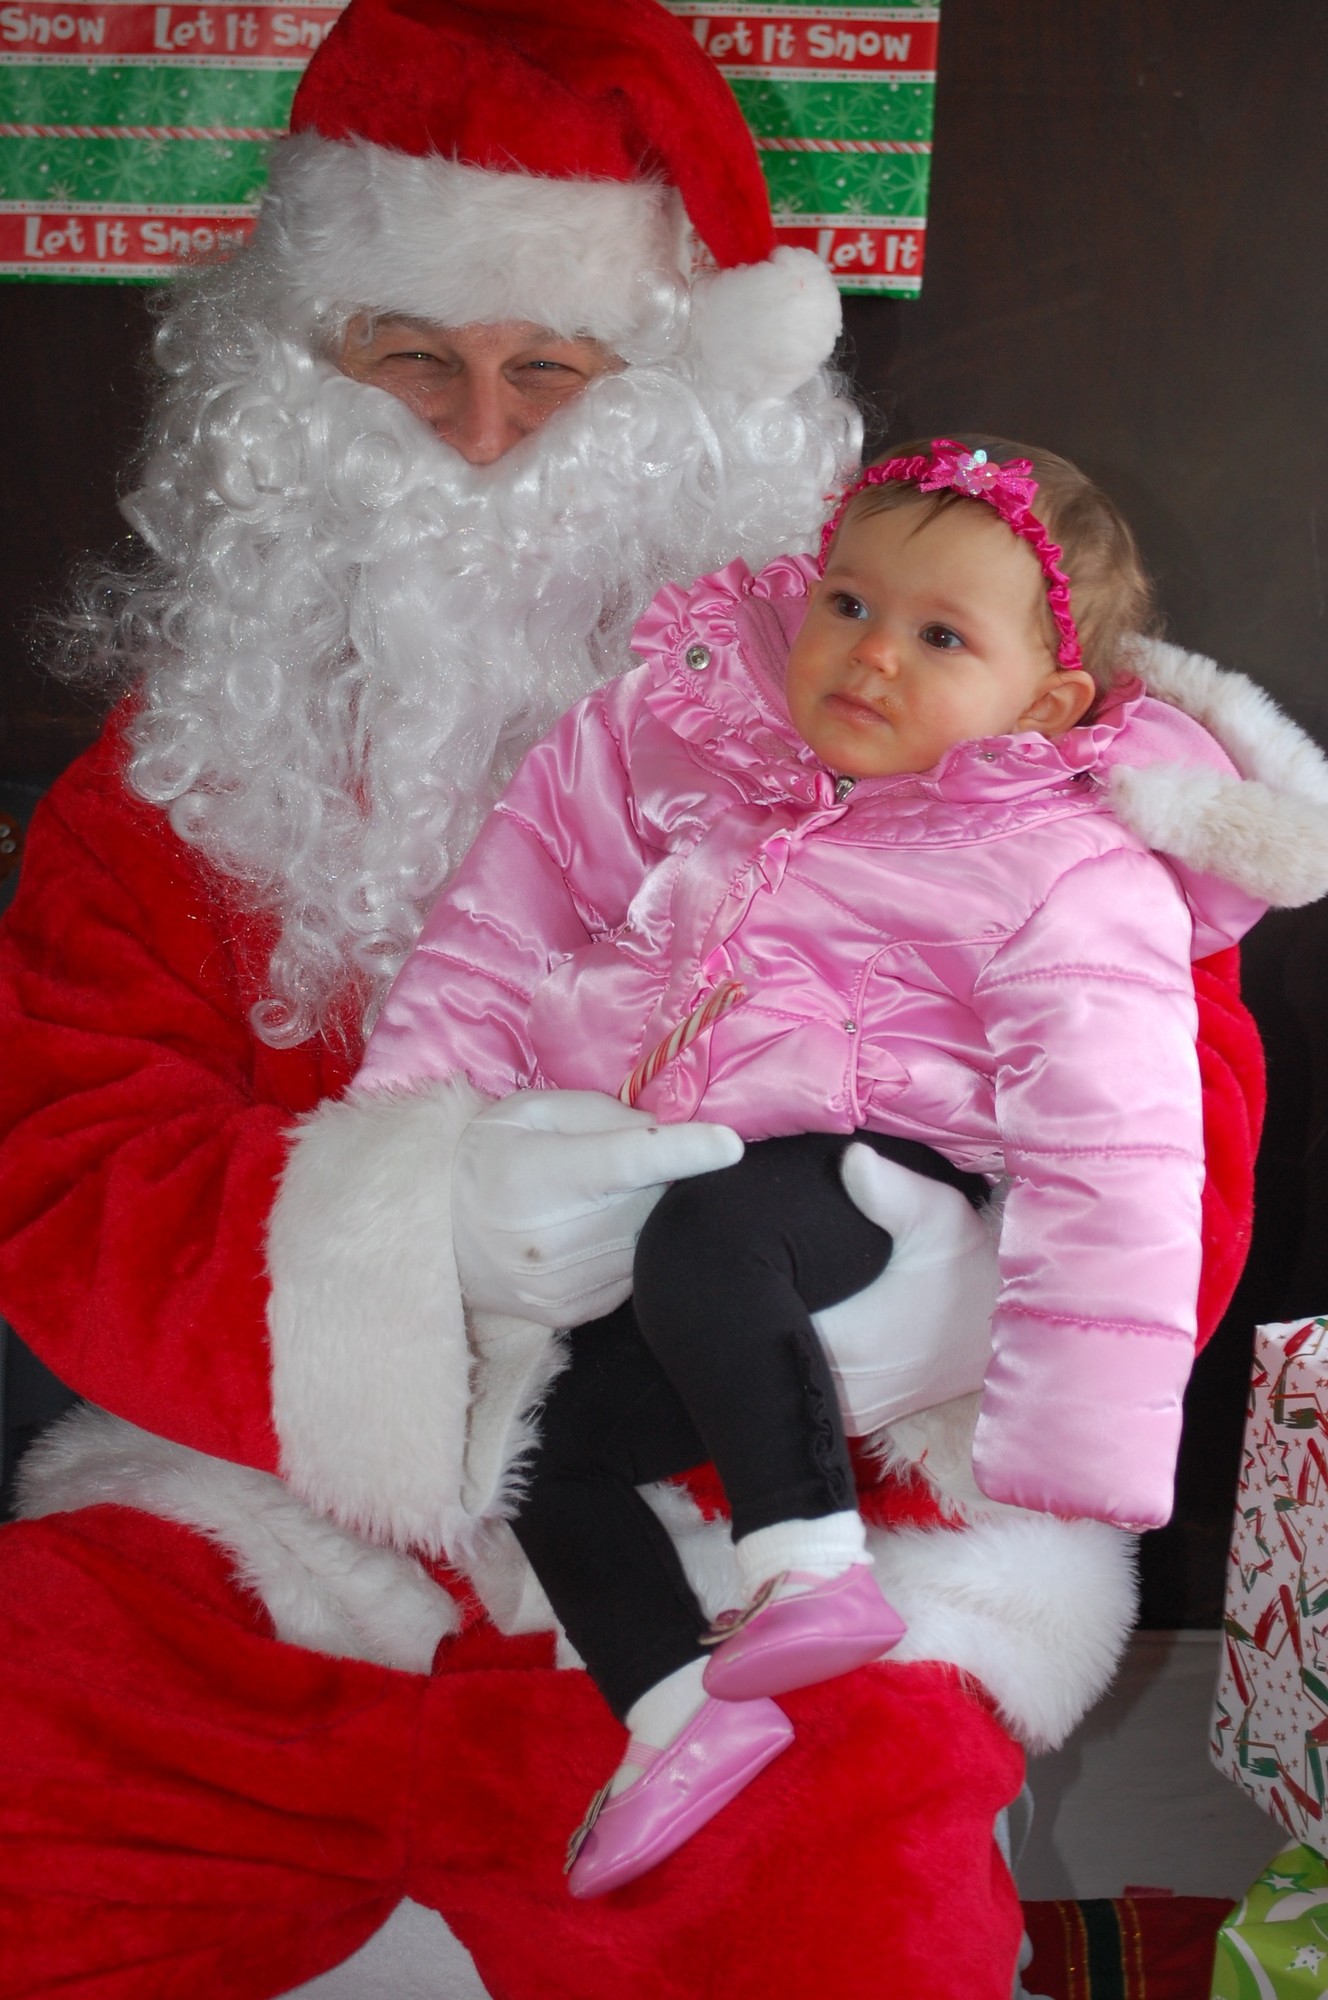 Lauren Kelly, 1, of Wantagh, met Santa for the first time.